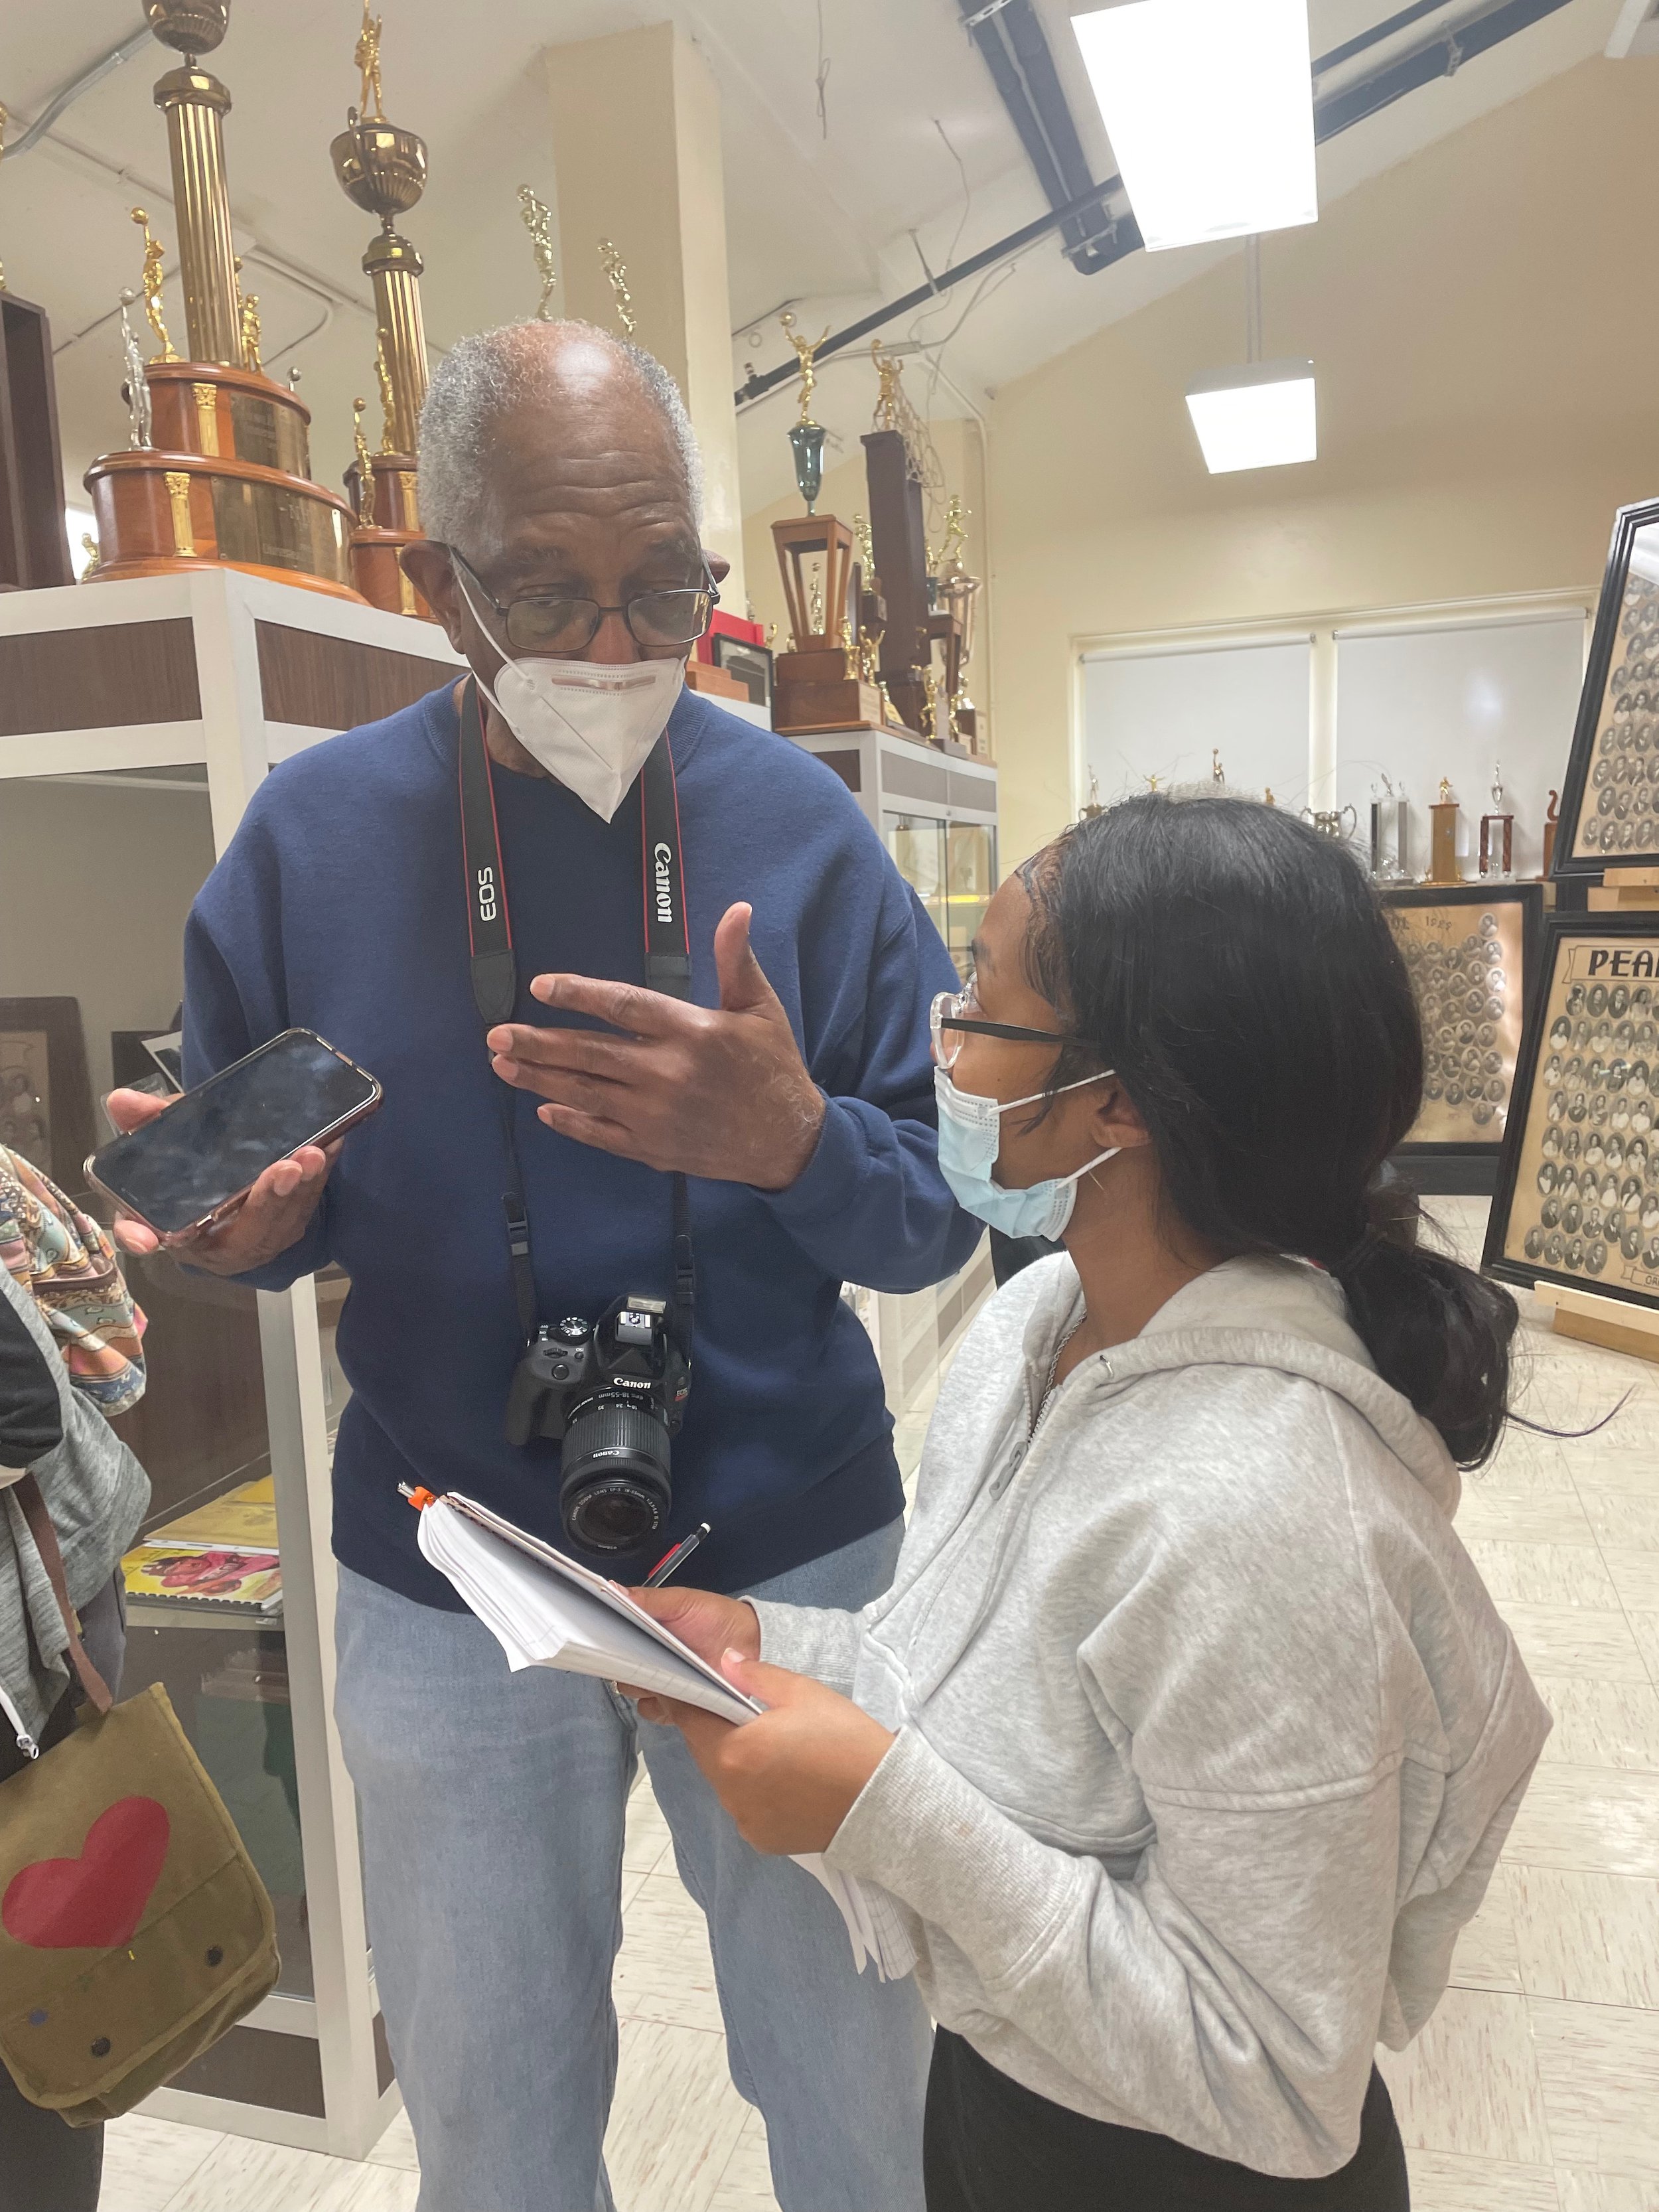 Aaliyah Riddle interviewing Mr. Henry Irvin, Jr., member of the Pearl High Alumni Association